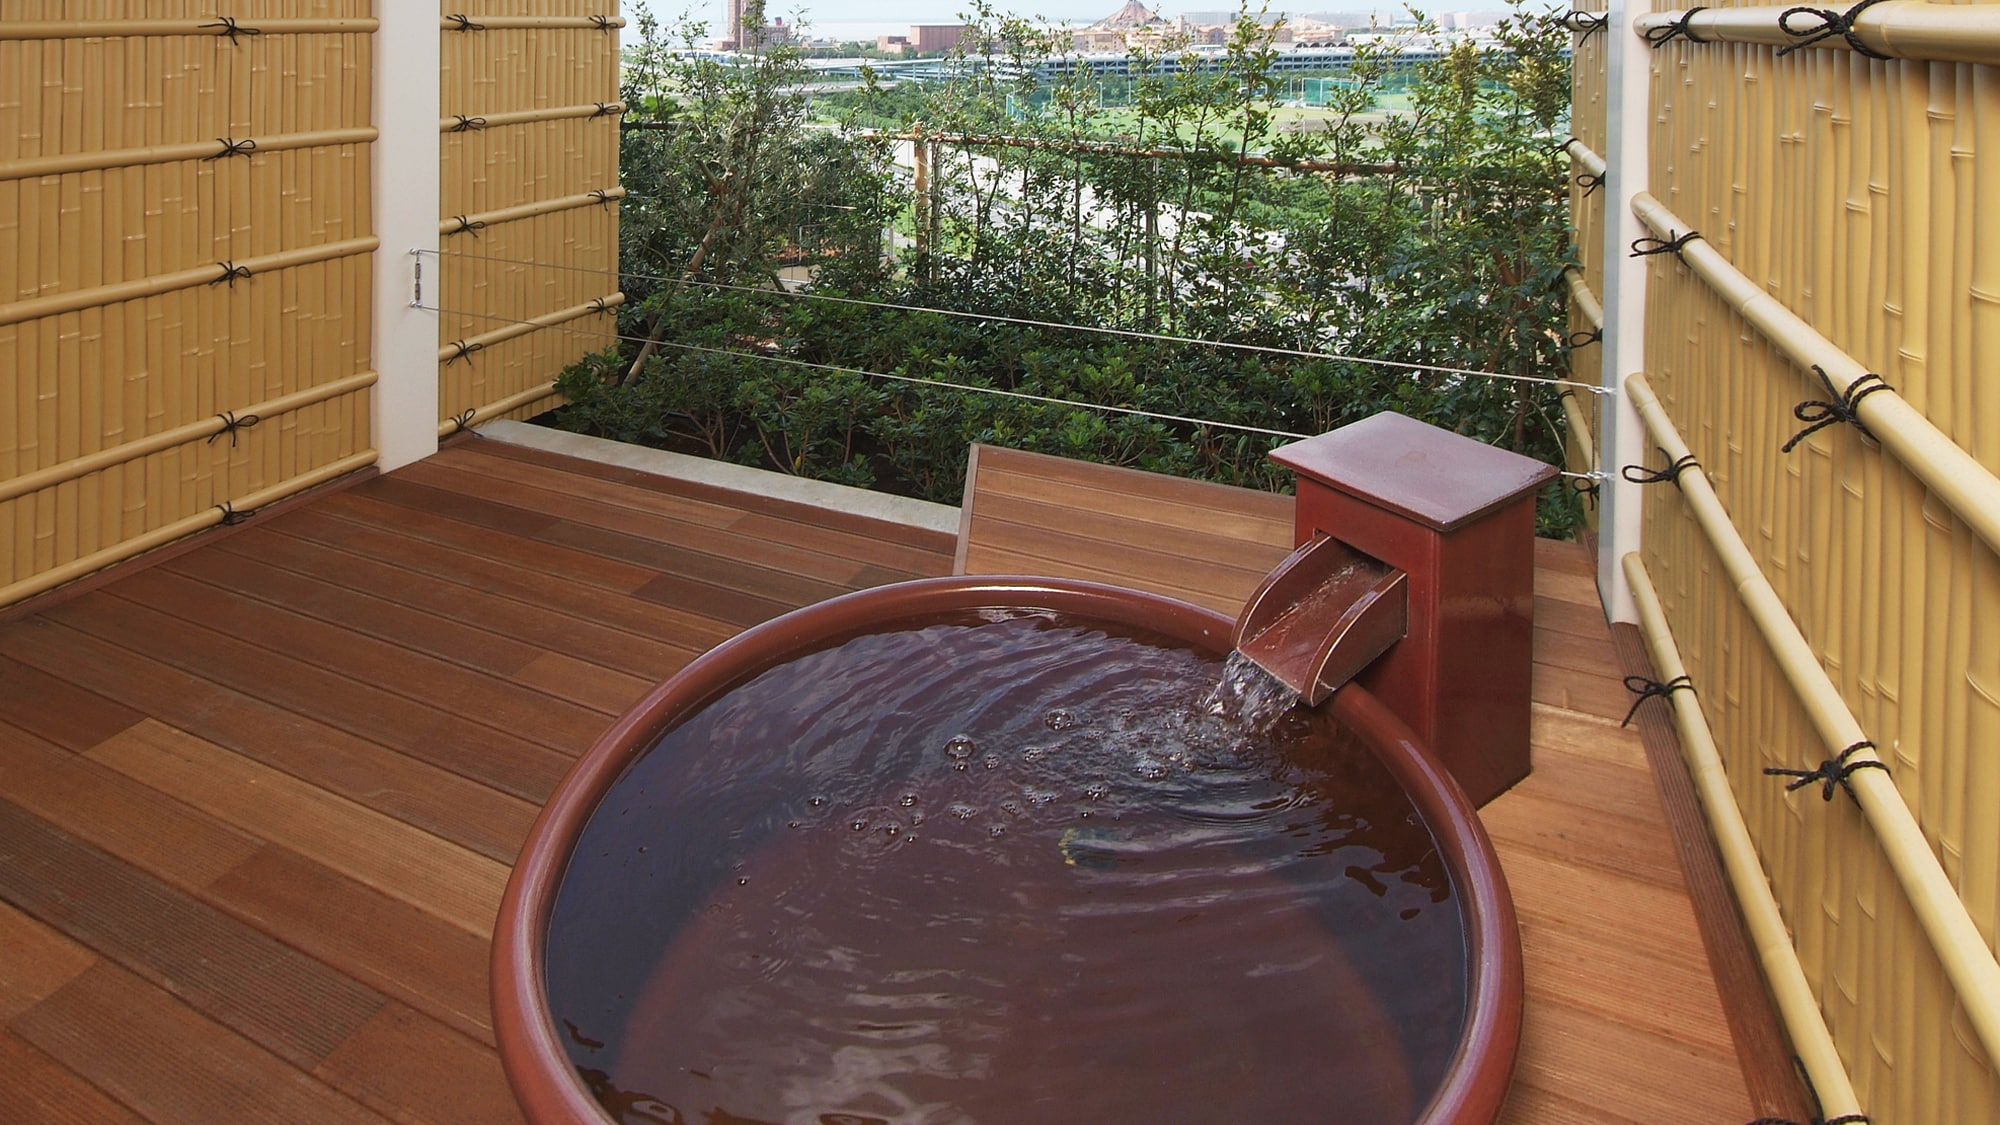 [Main building] Open-air bath in a Japanese-style room (picture is an image)